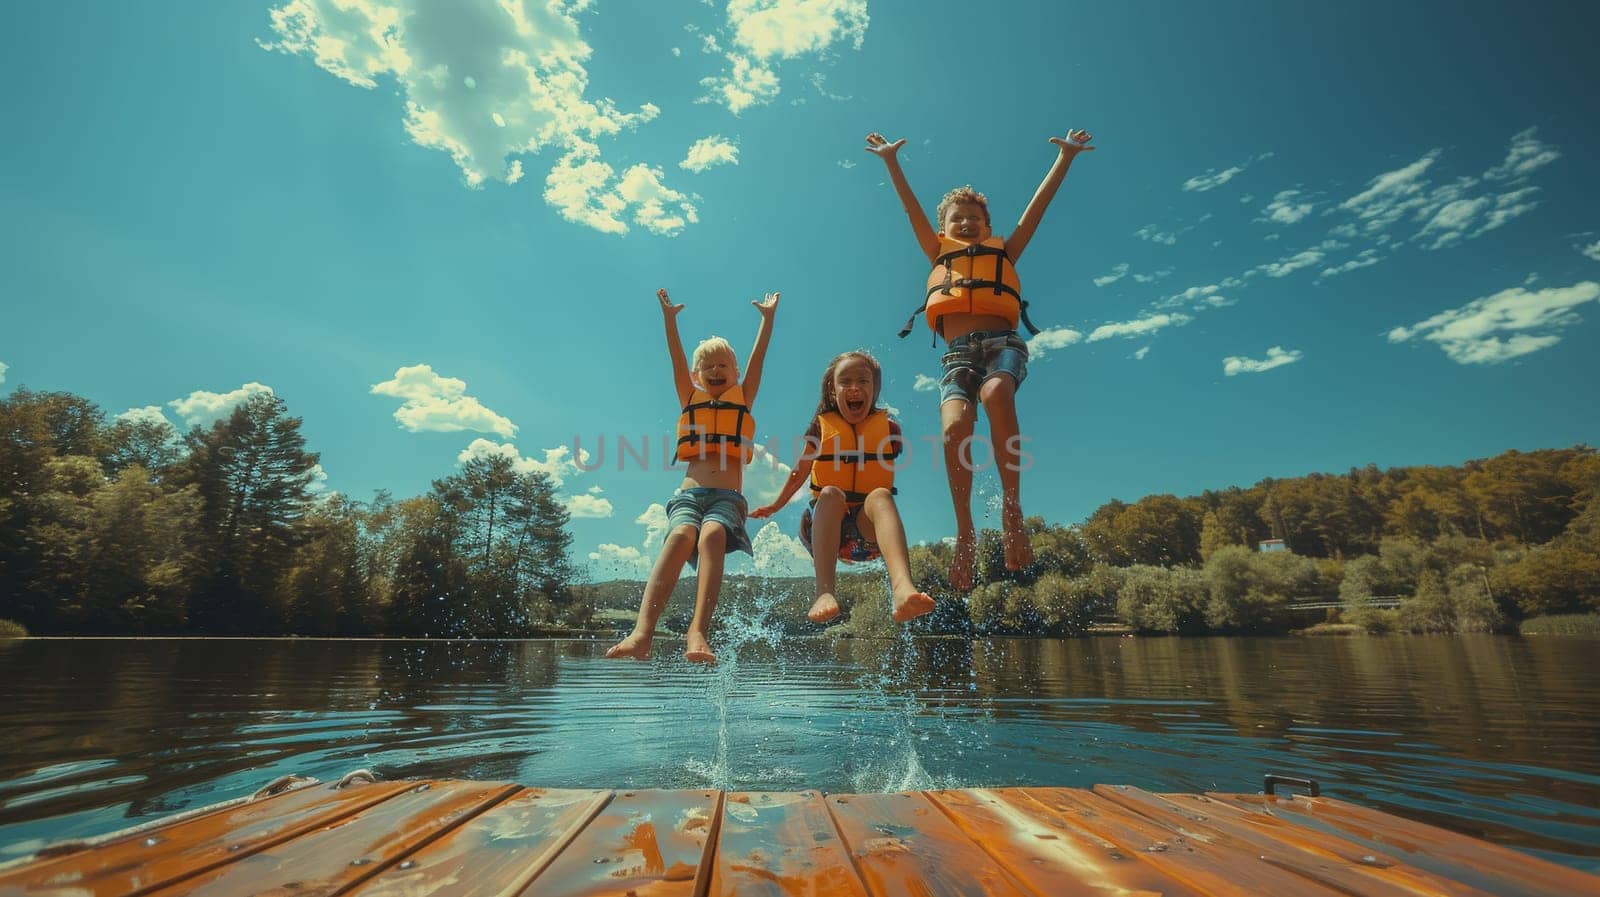 Three children are jumping into a lake on a dock. They are wearing life jackets and are having fun